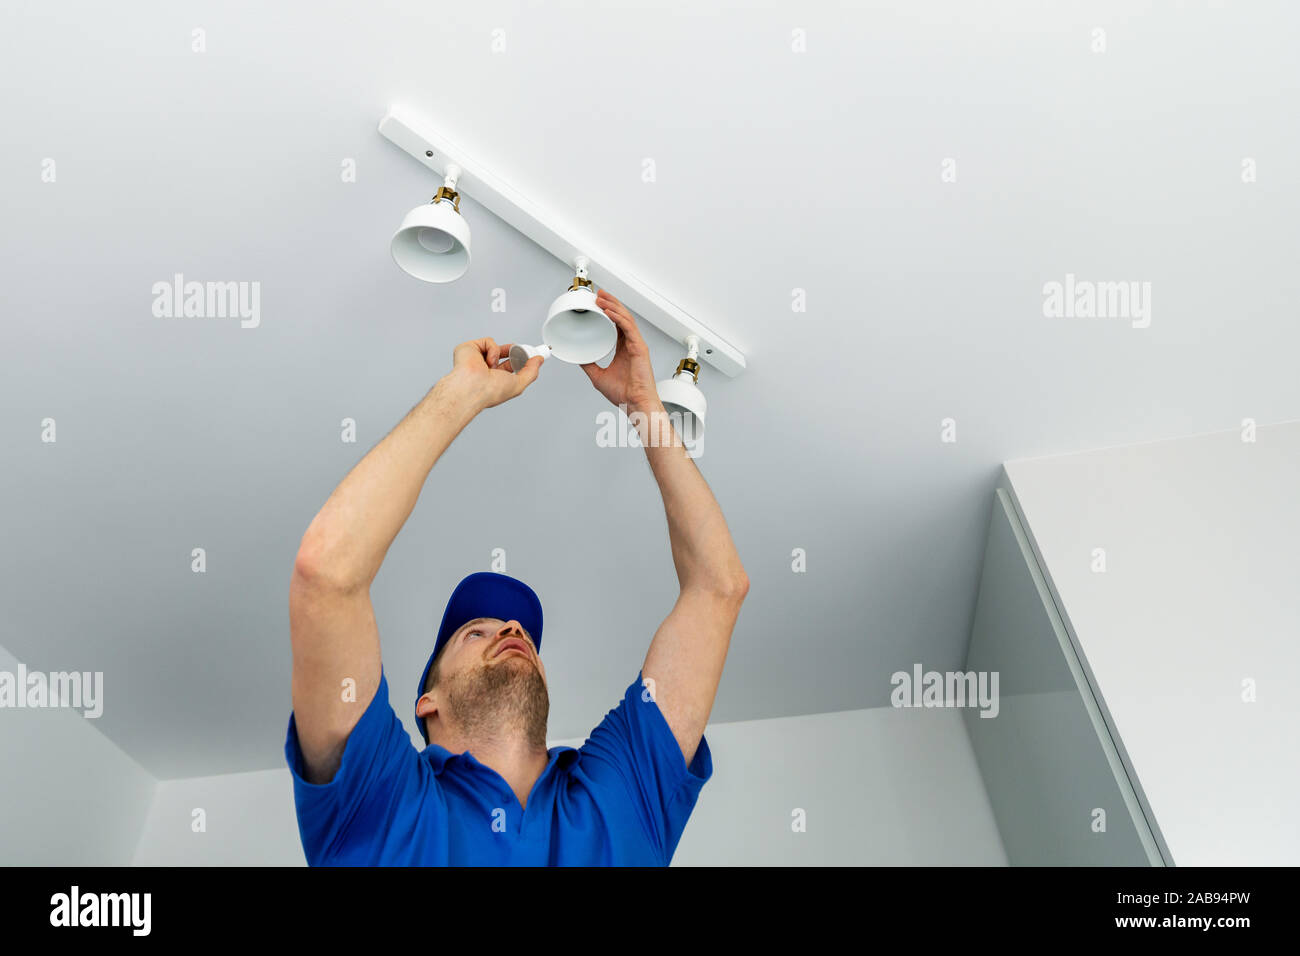 Electrician Installing Led Light Bulbs In Ceiling Lamp Stock Photo